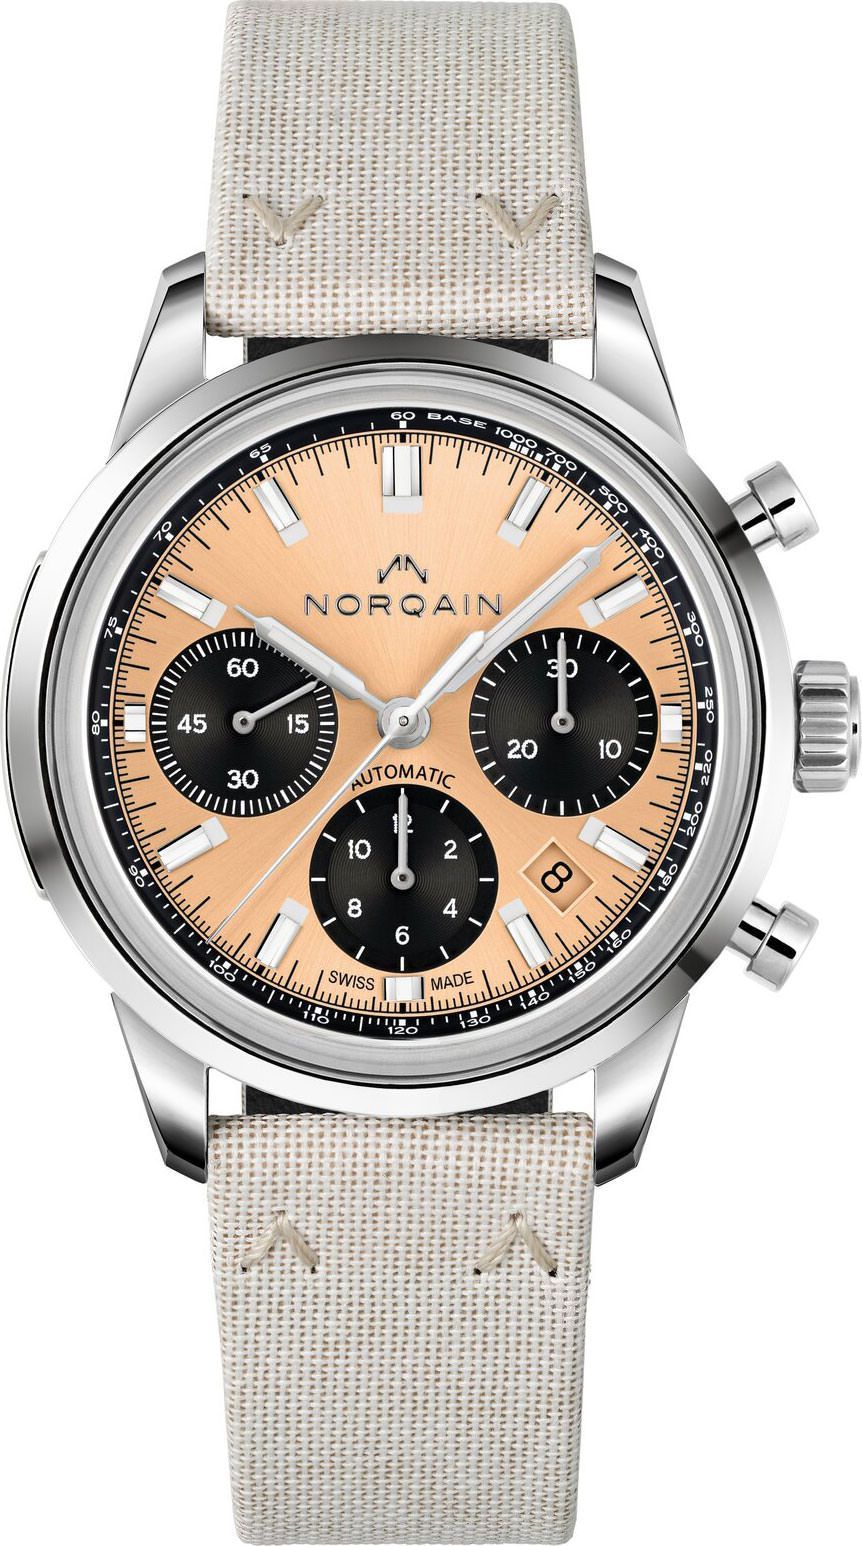 NORQAIN Freedom Freedom 60 Chrono Peach Dial 40 mm Automatic Watch For Unisex - 1